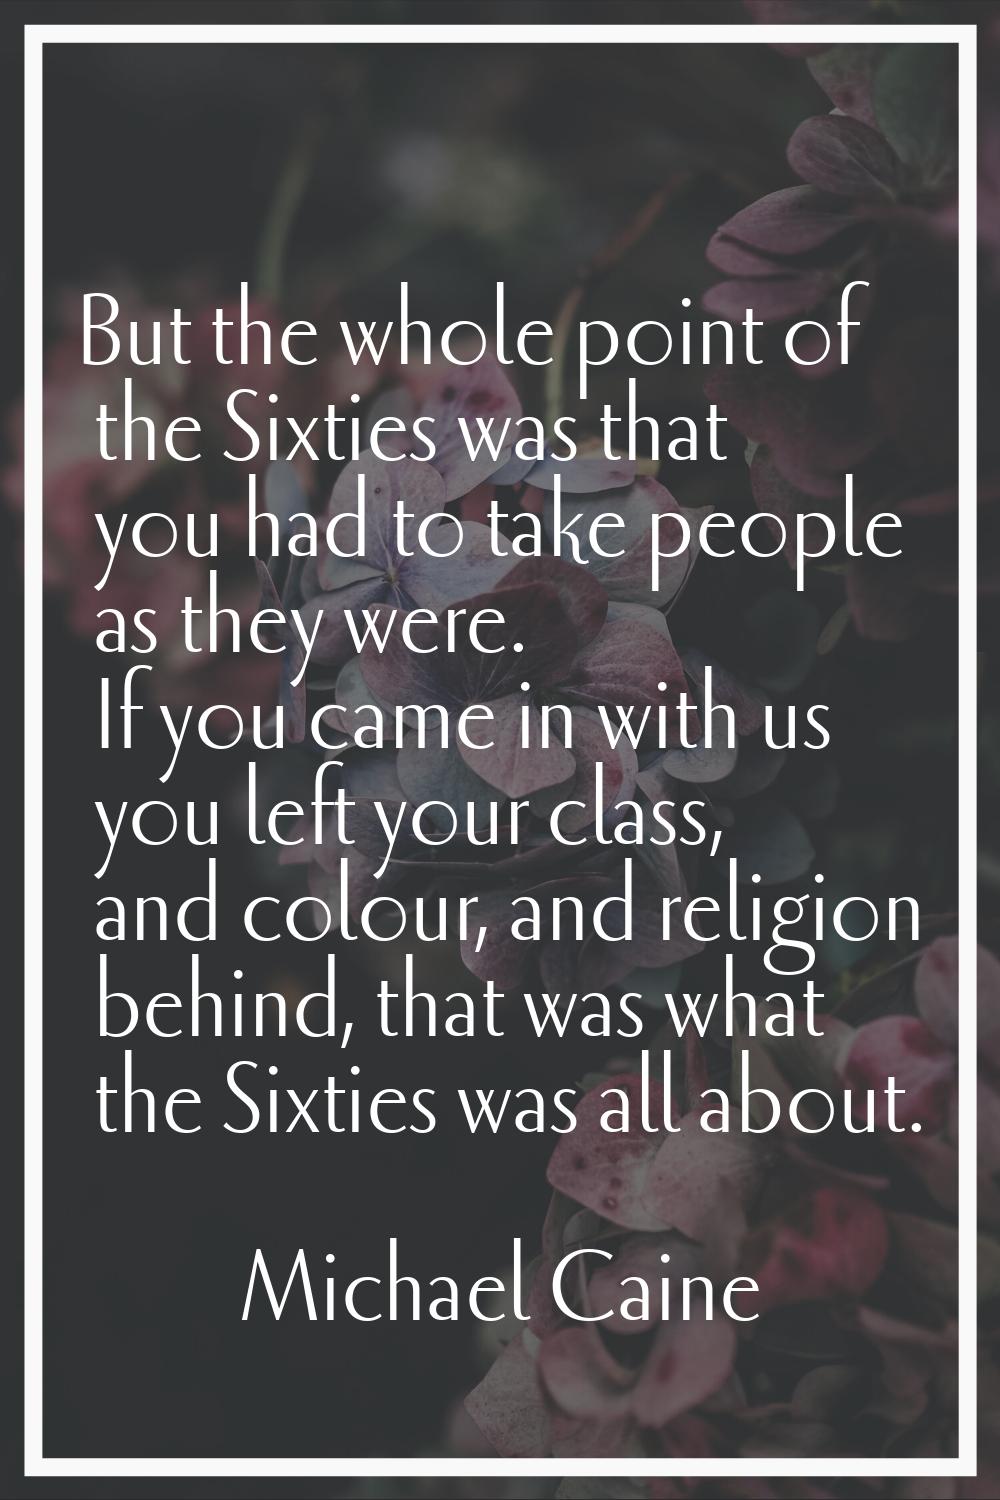 But the whole point of the Sixties was that you had to take people as they were. If you came in wit